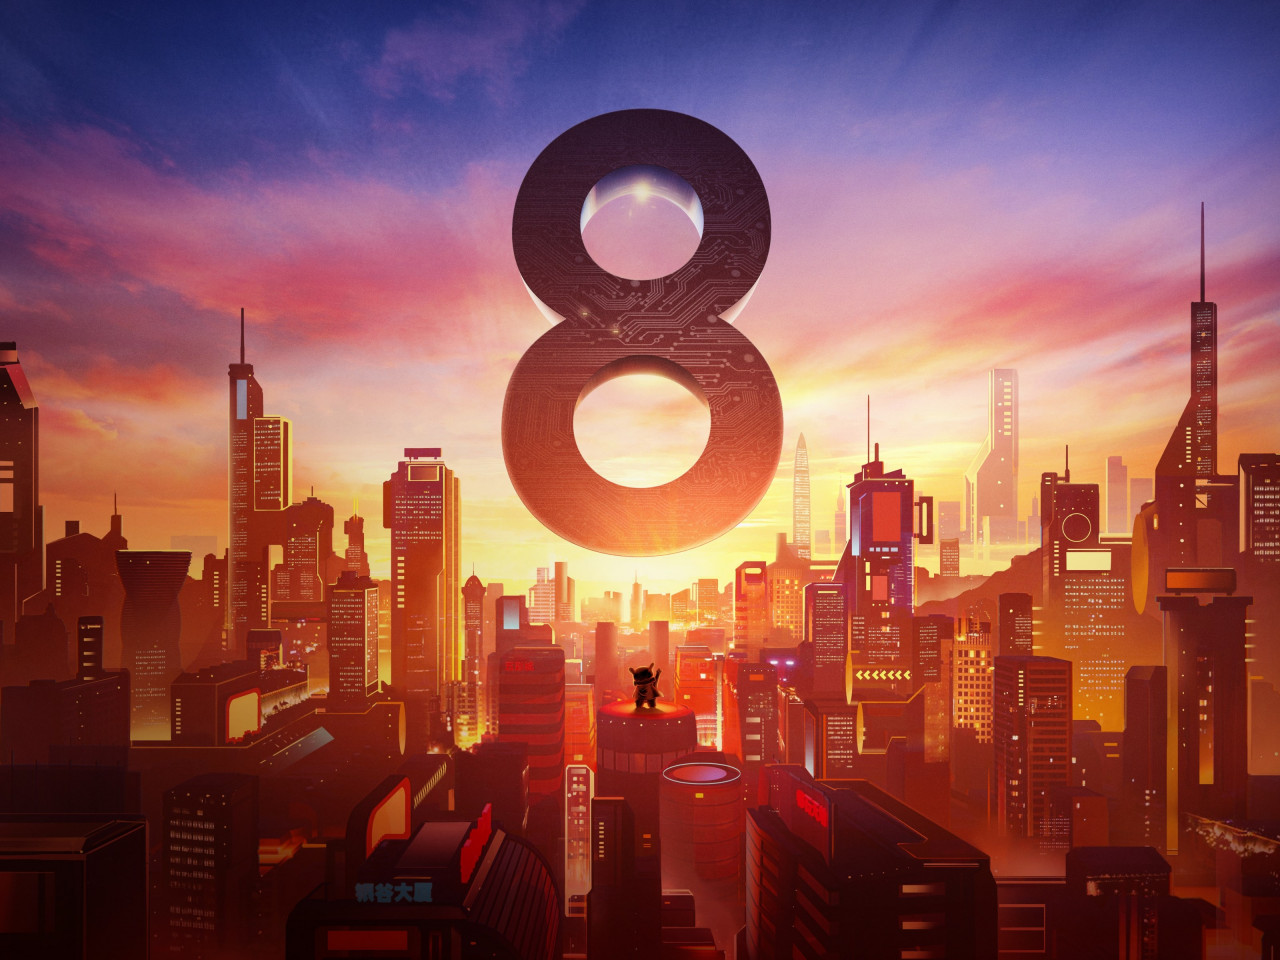 Xiaomi Mi 8. Poster from the launch event wallpaper 1280x960